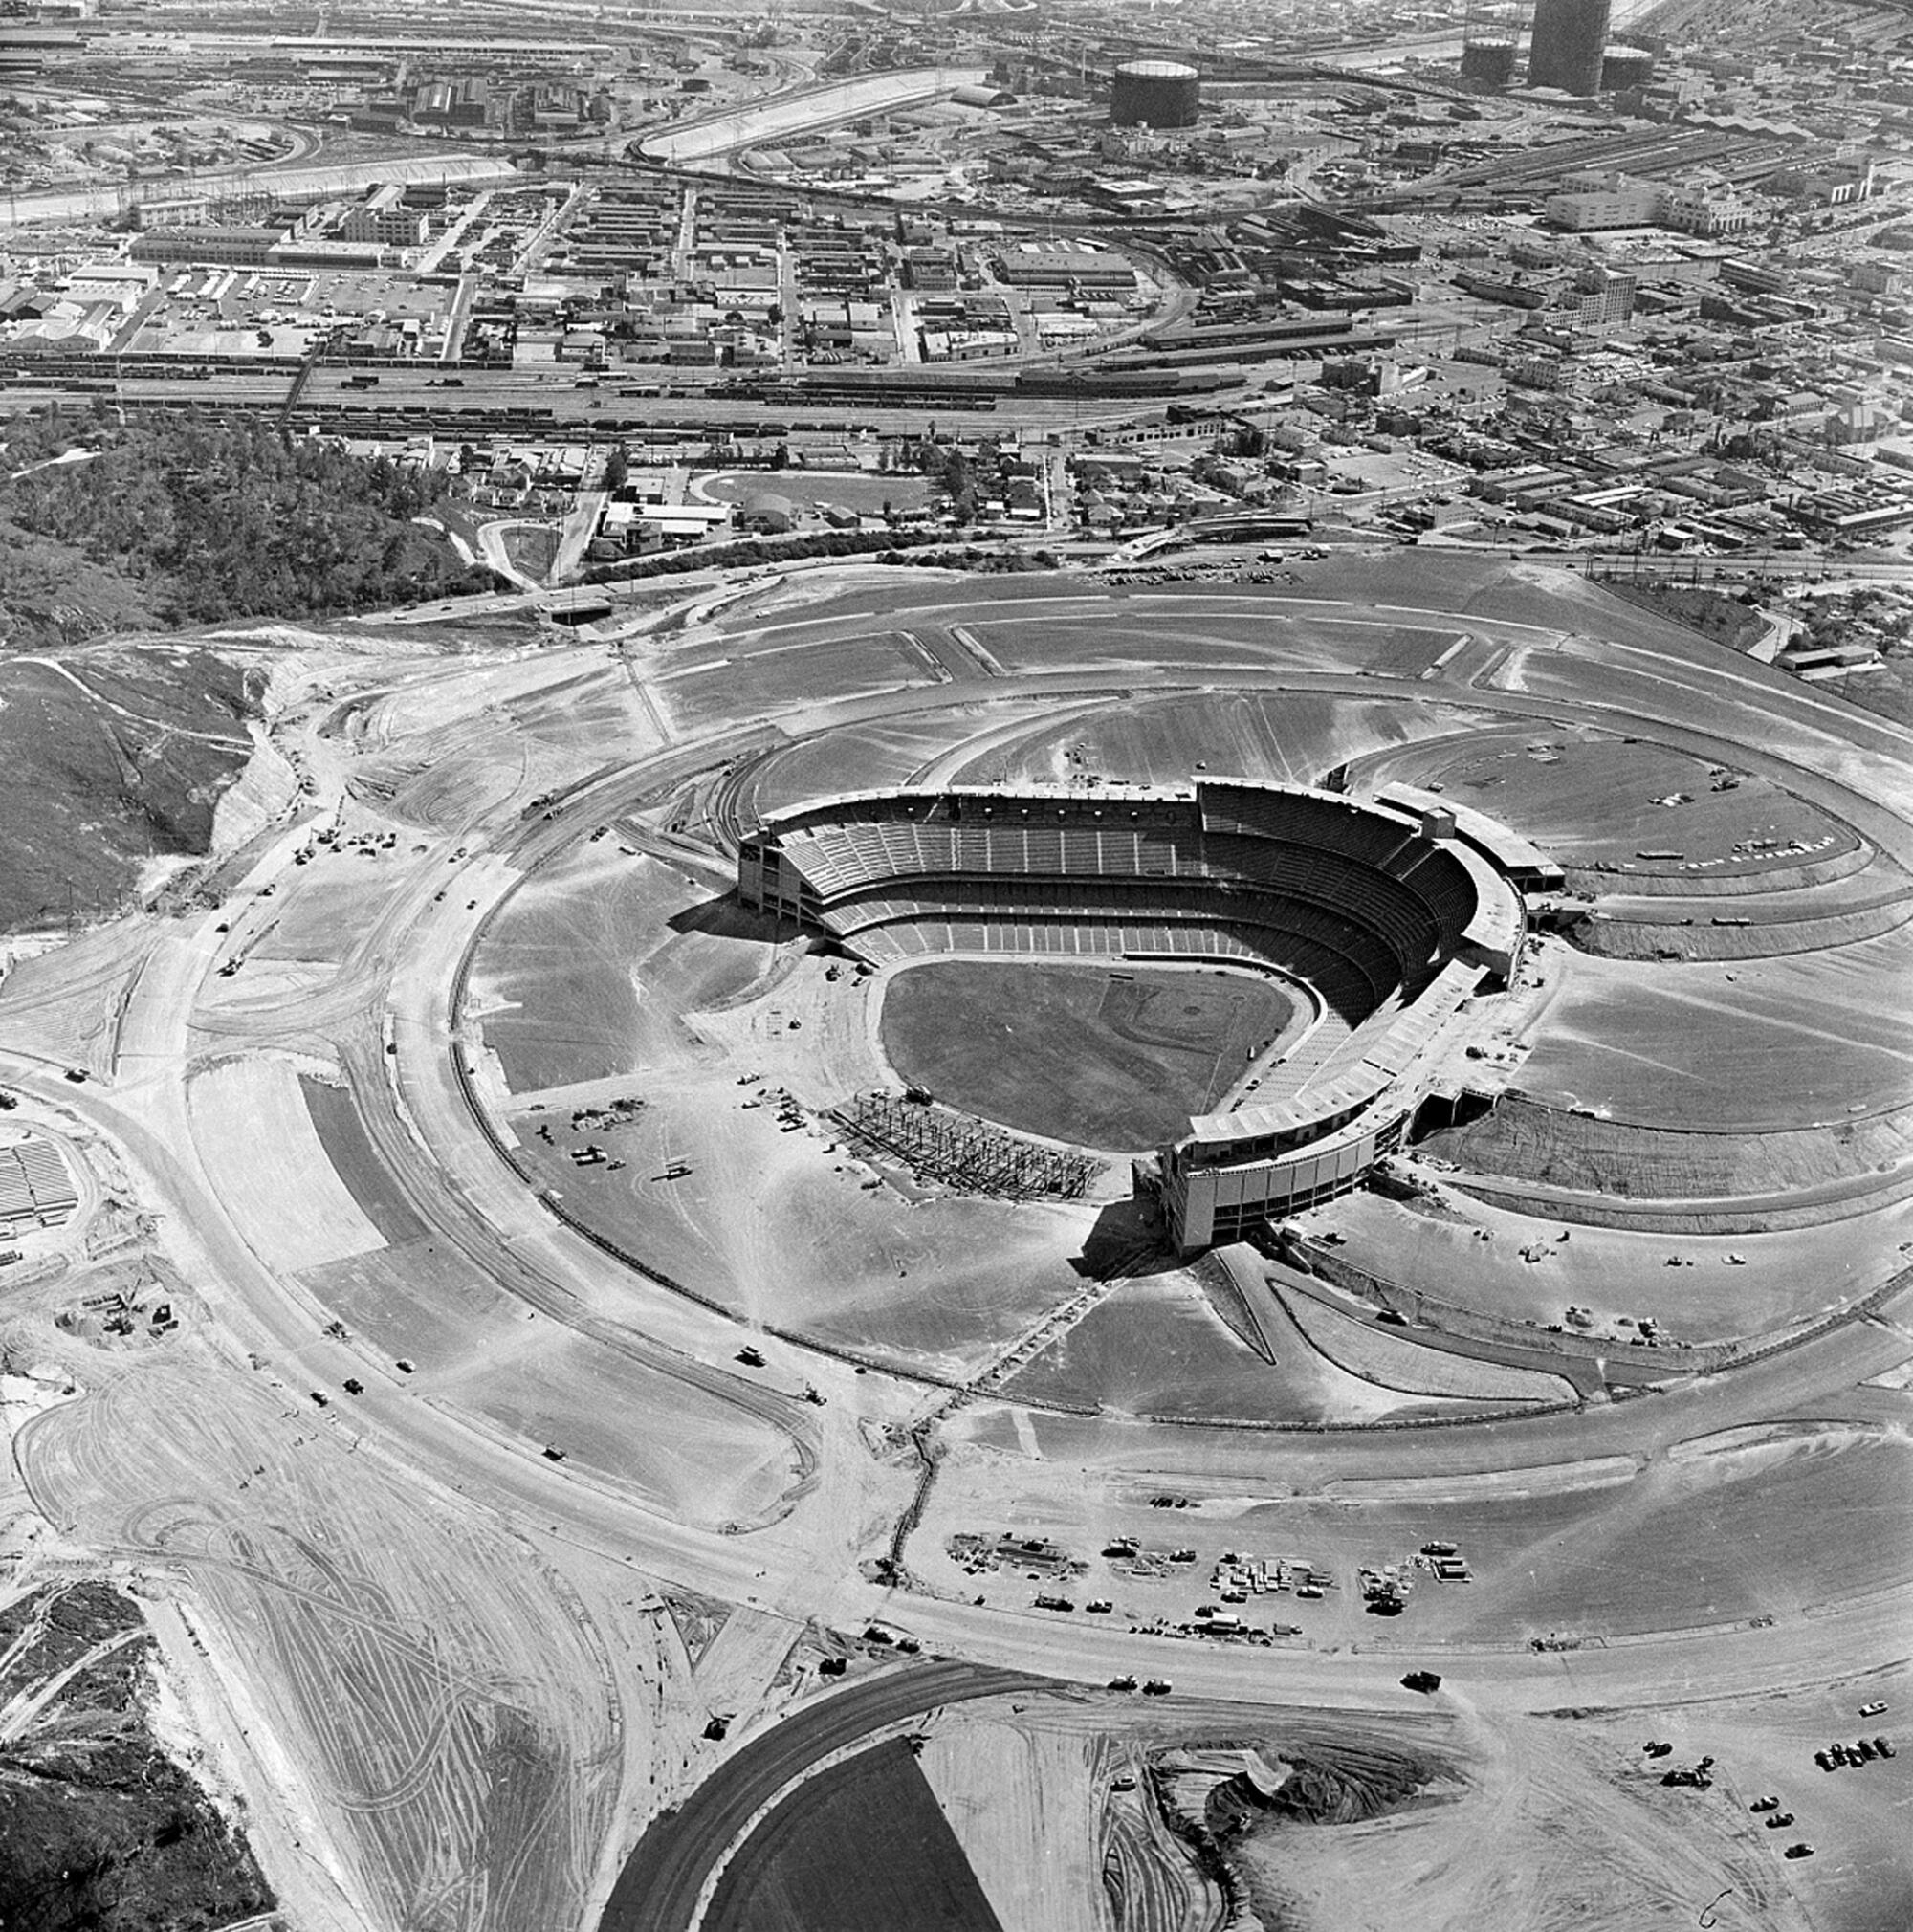 Decades later, bitter memories of Chavez Ravine The Dodgers